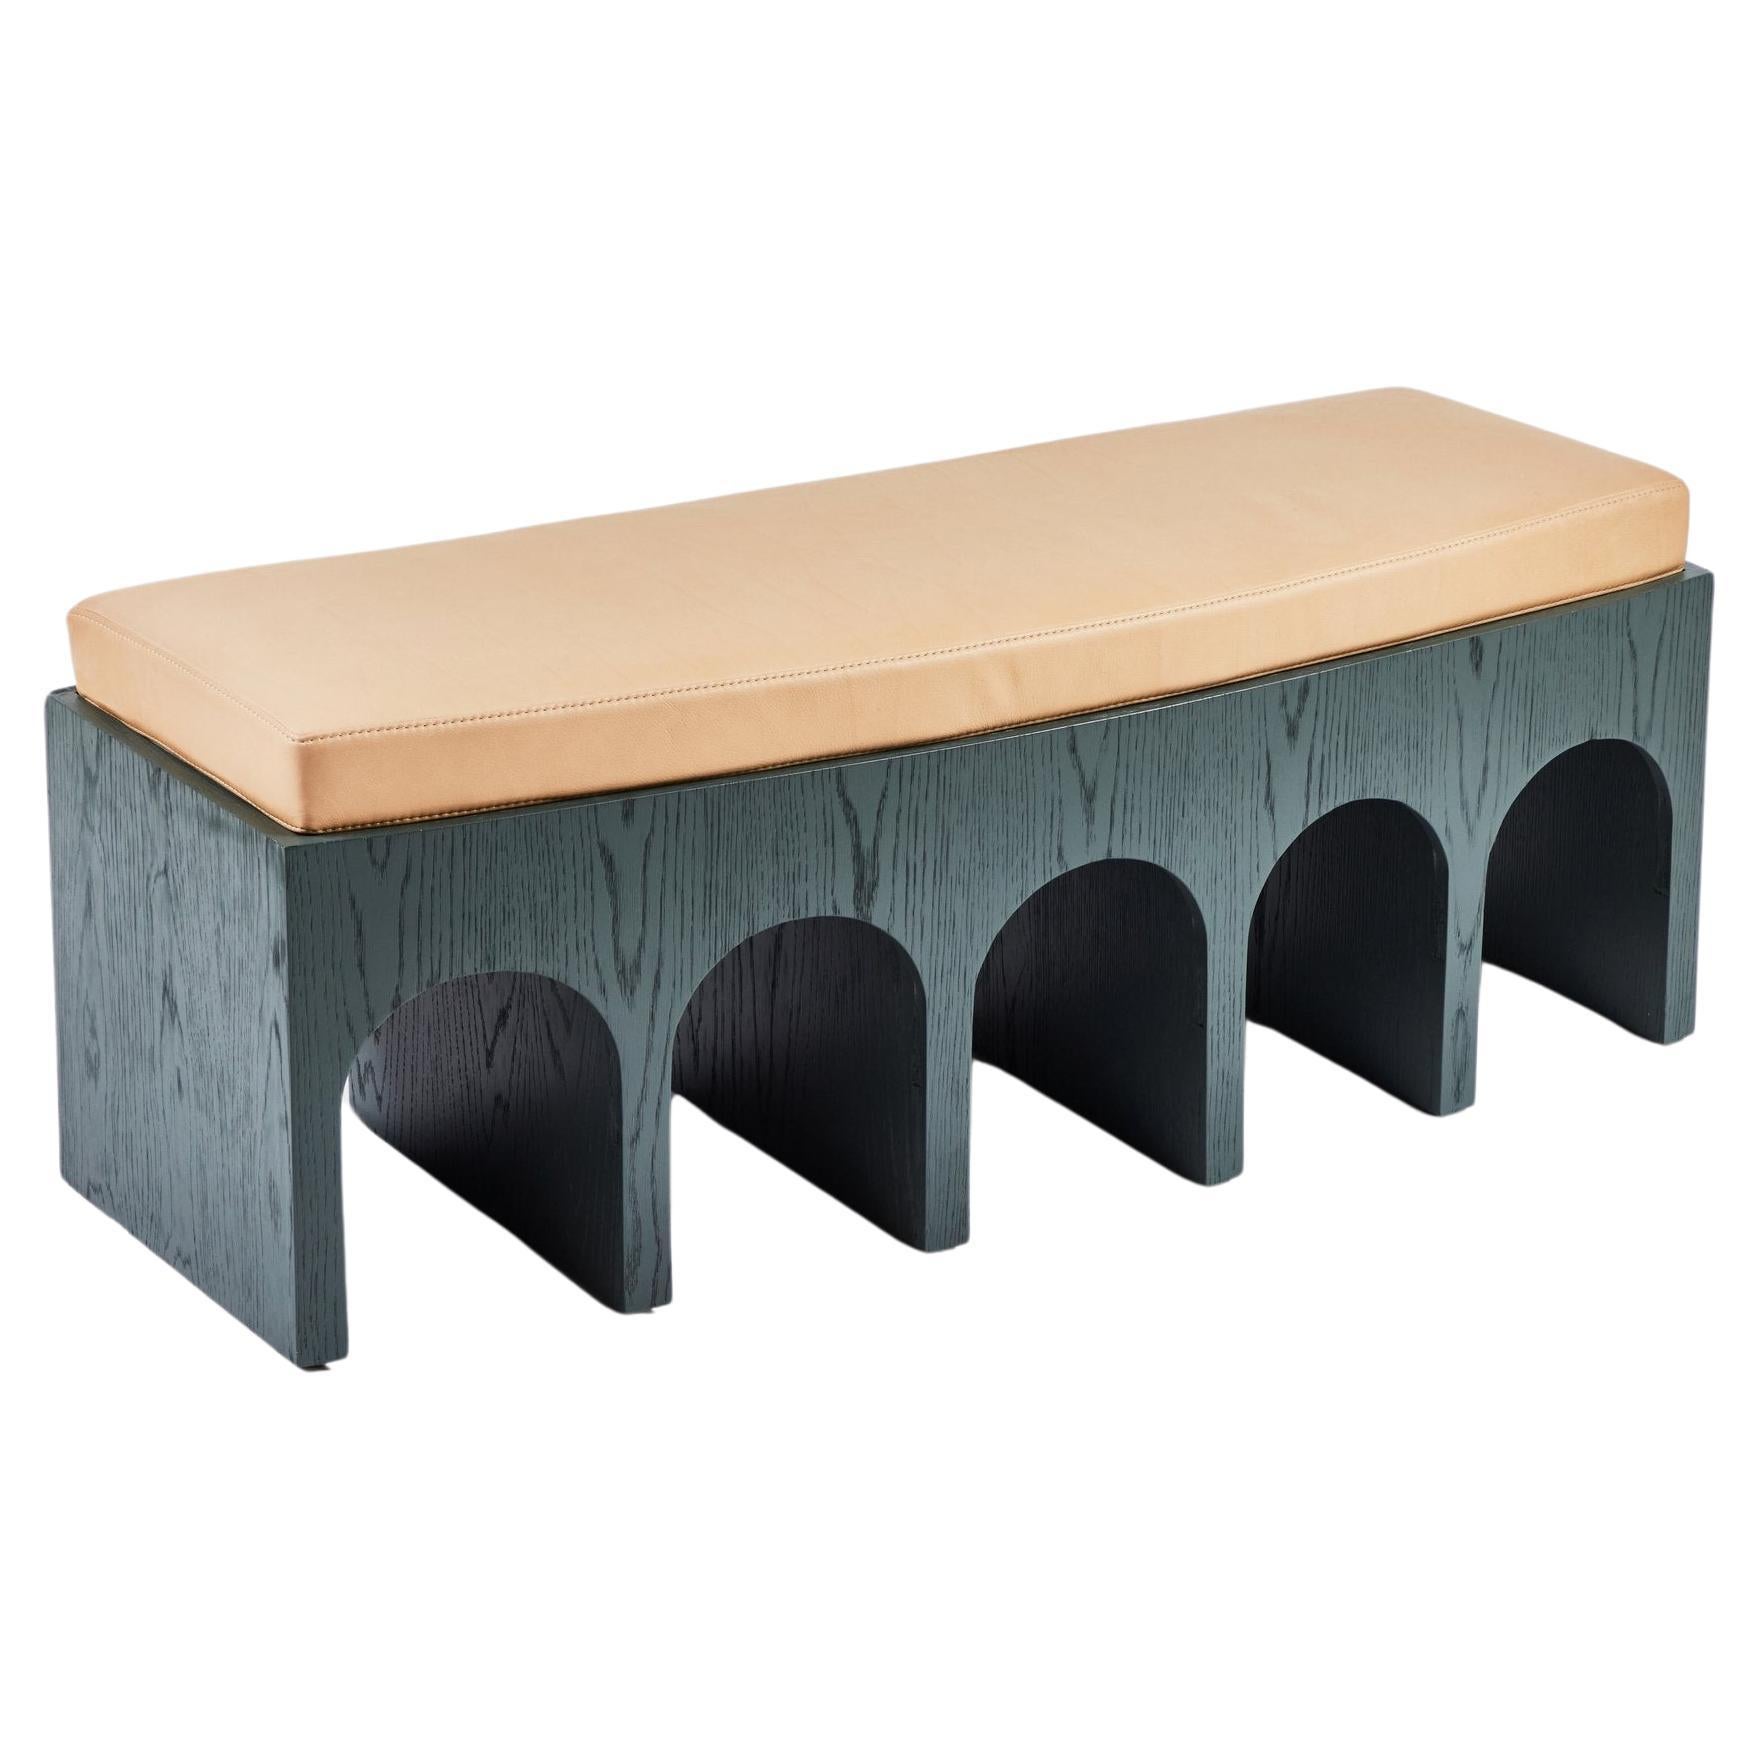 Minimalist Arched Upholstered Arcade Bench Lacquer on Oak by Martin and Brockett For Sale